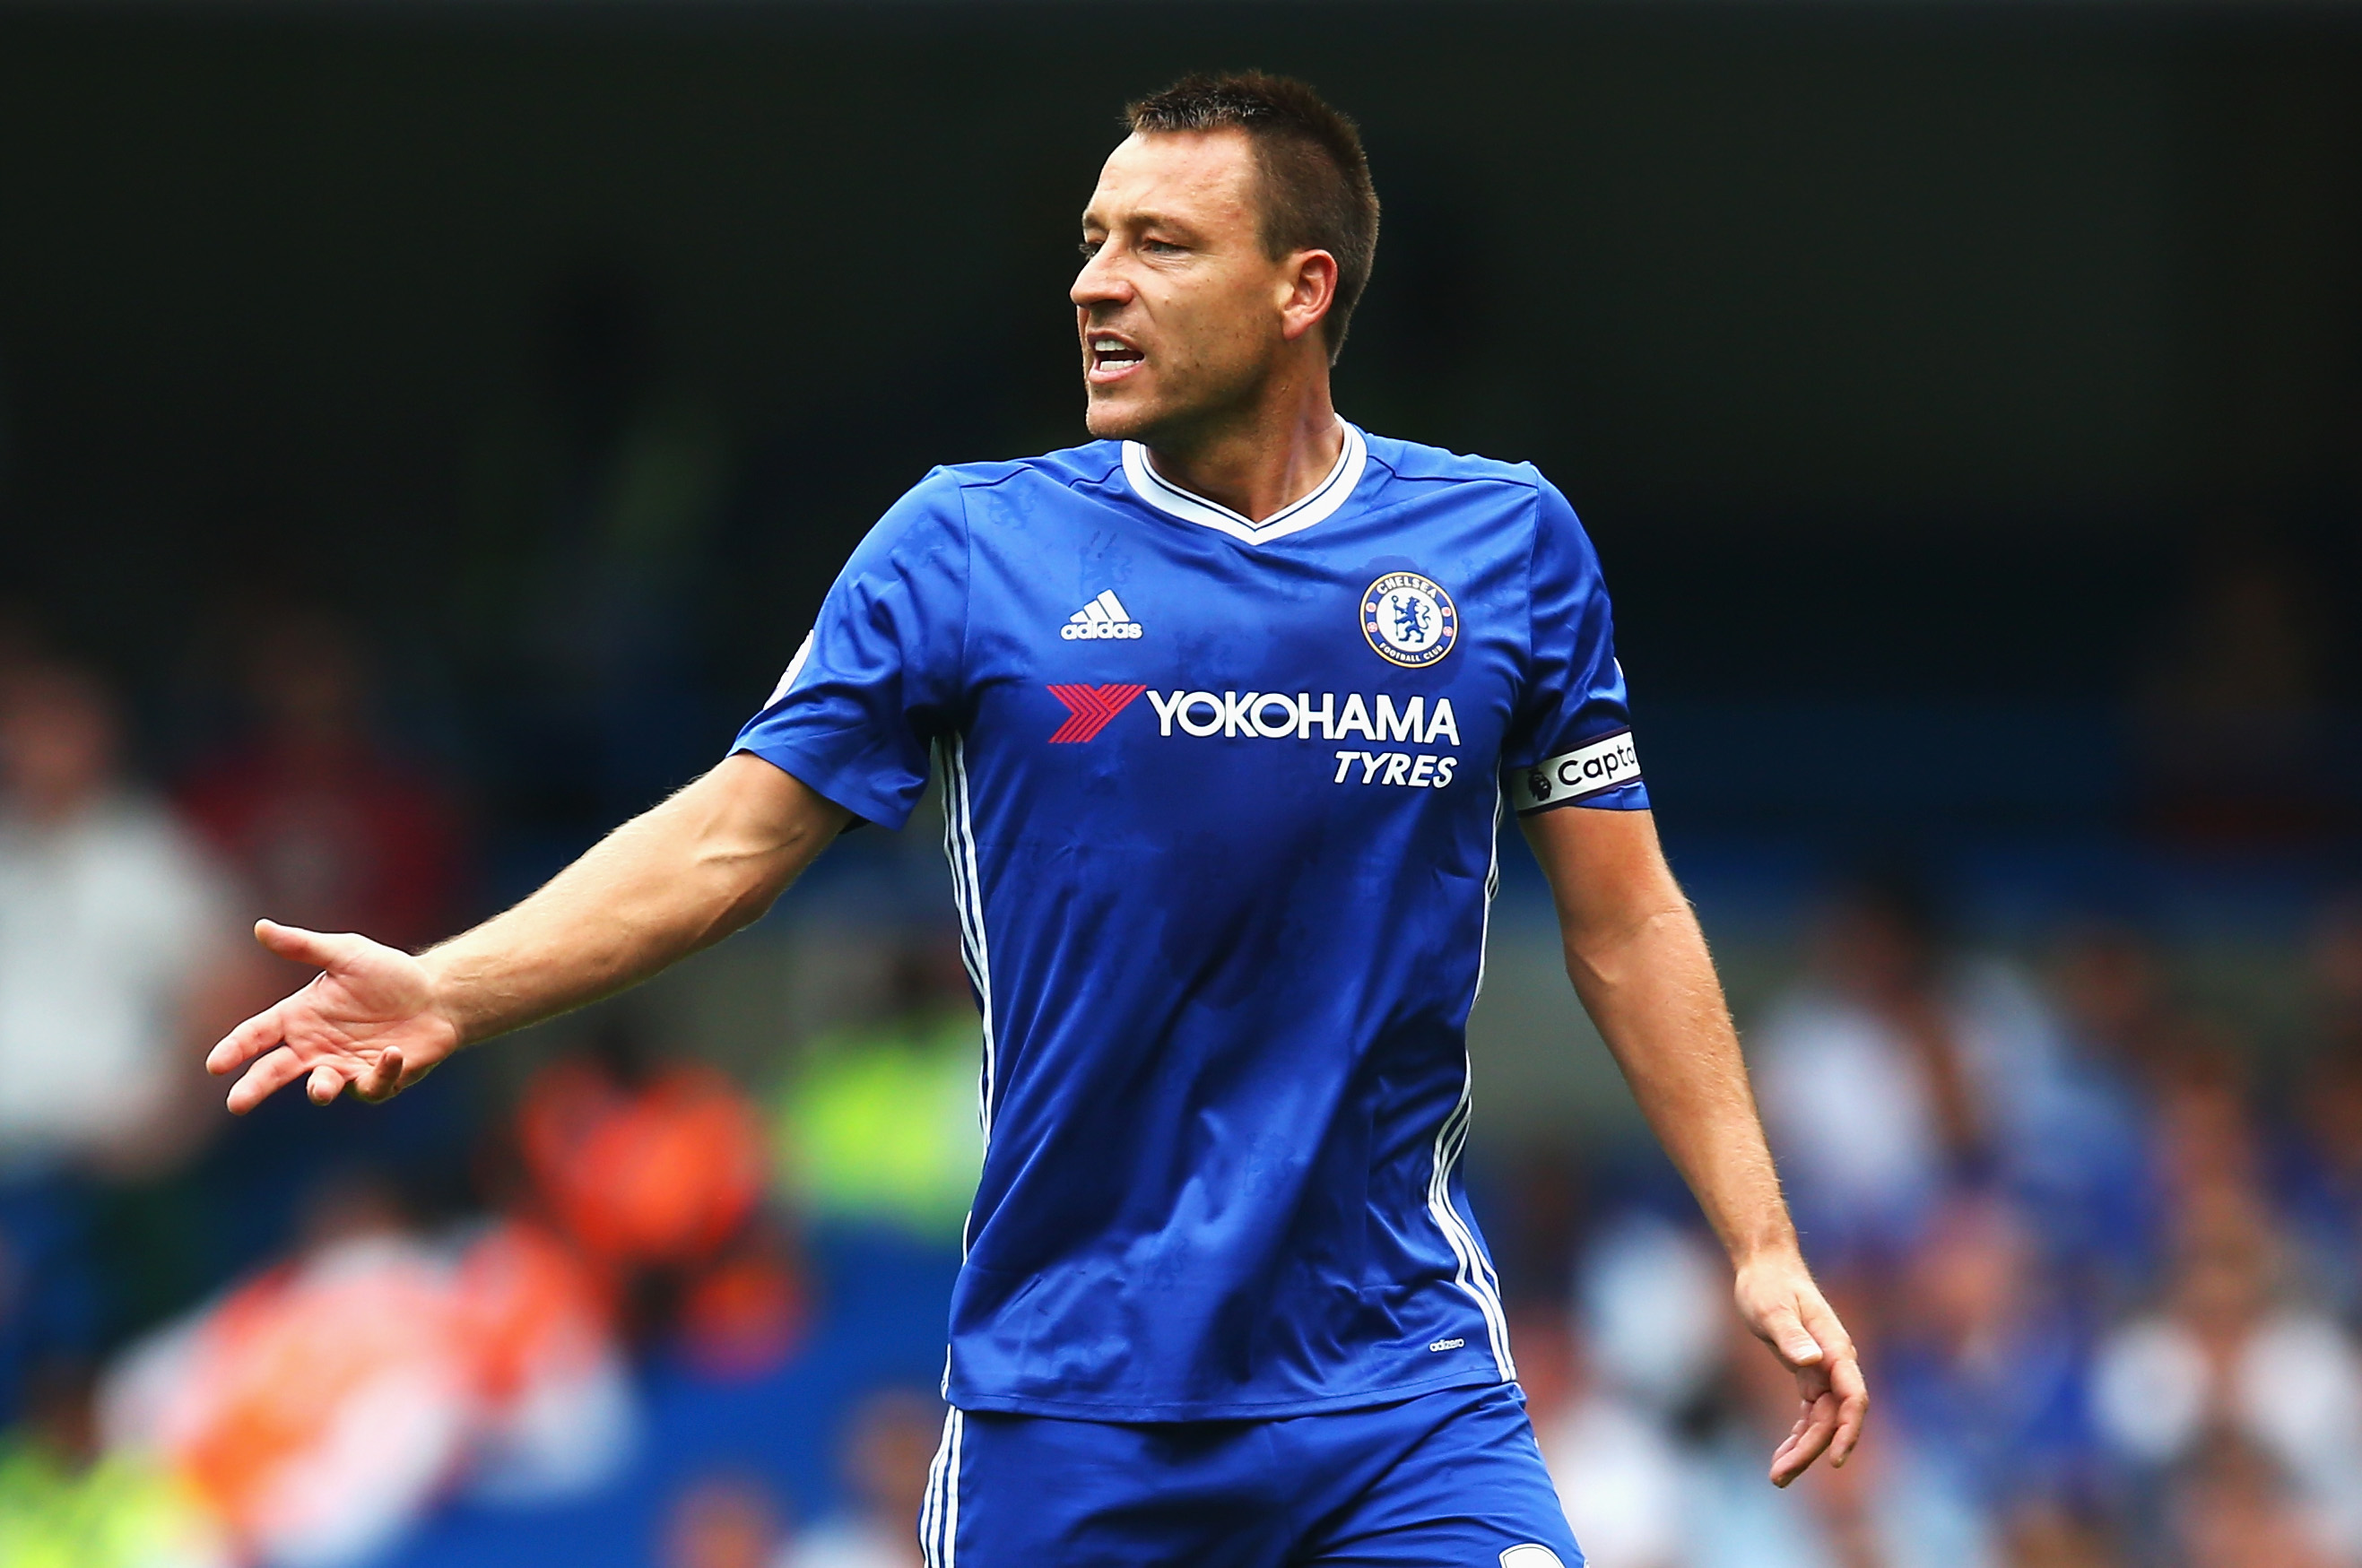 John Terry's recovery from injury will be good news for Chelsea (Photo by Steve Bardens/Getty Images)